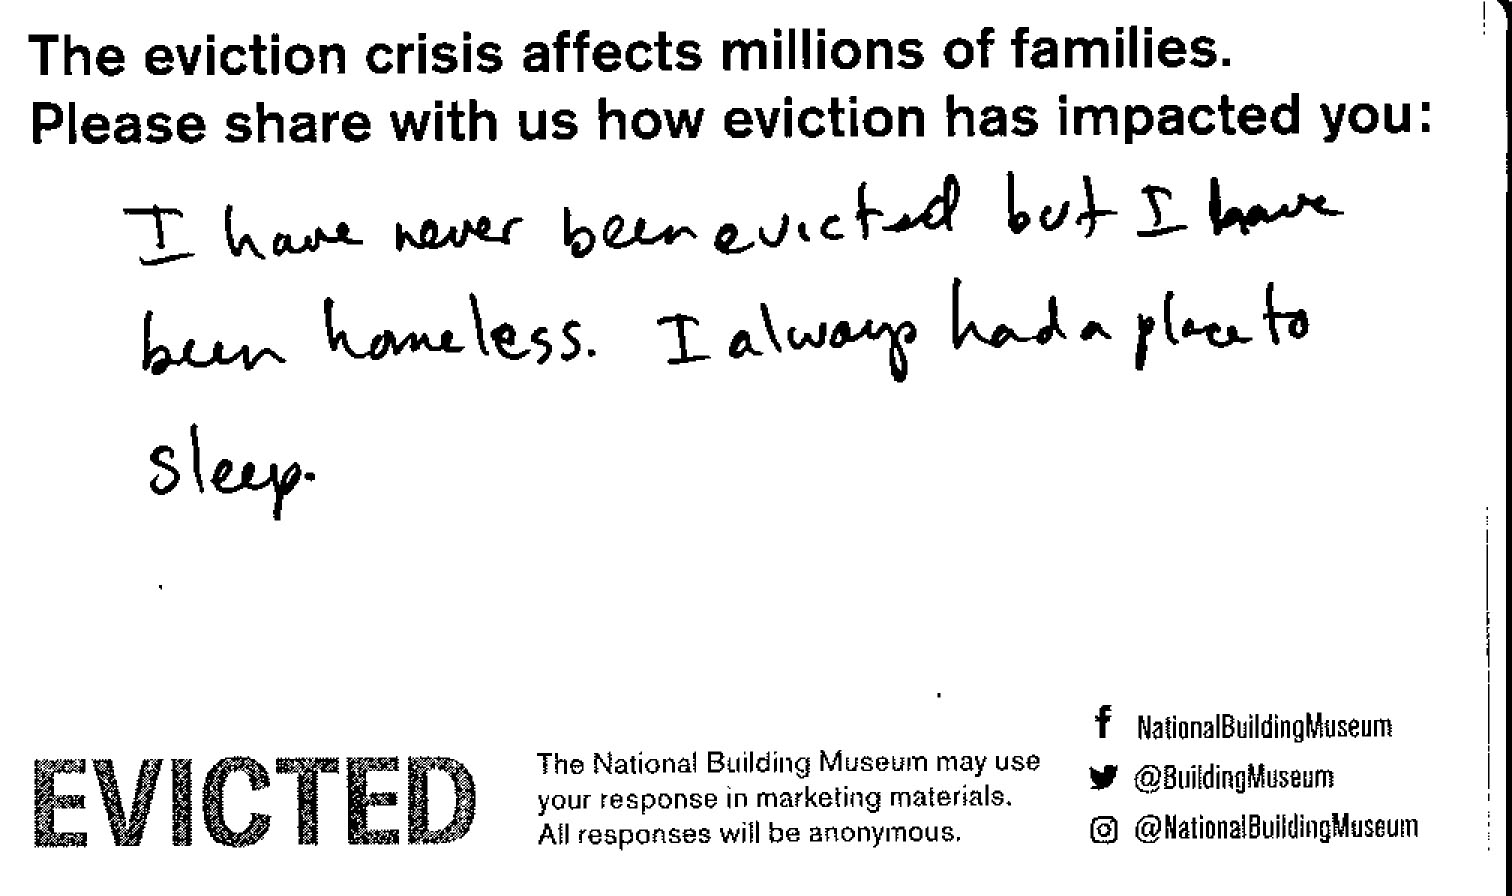 I have never been evicted but I have been homeless. I always had a place to sleep.